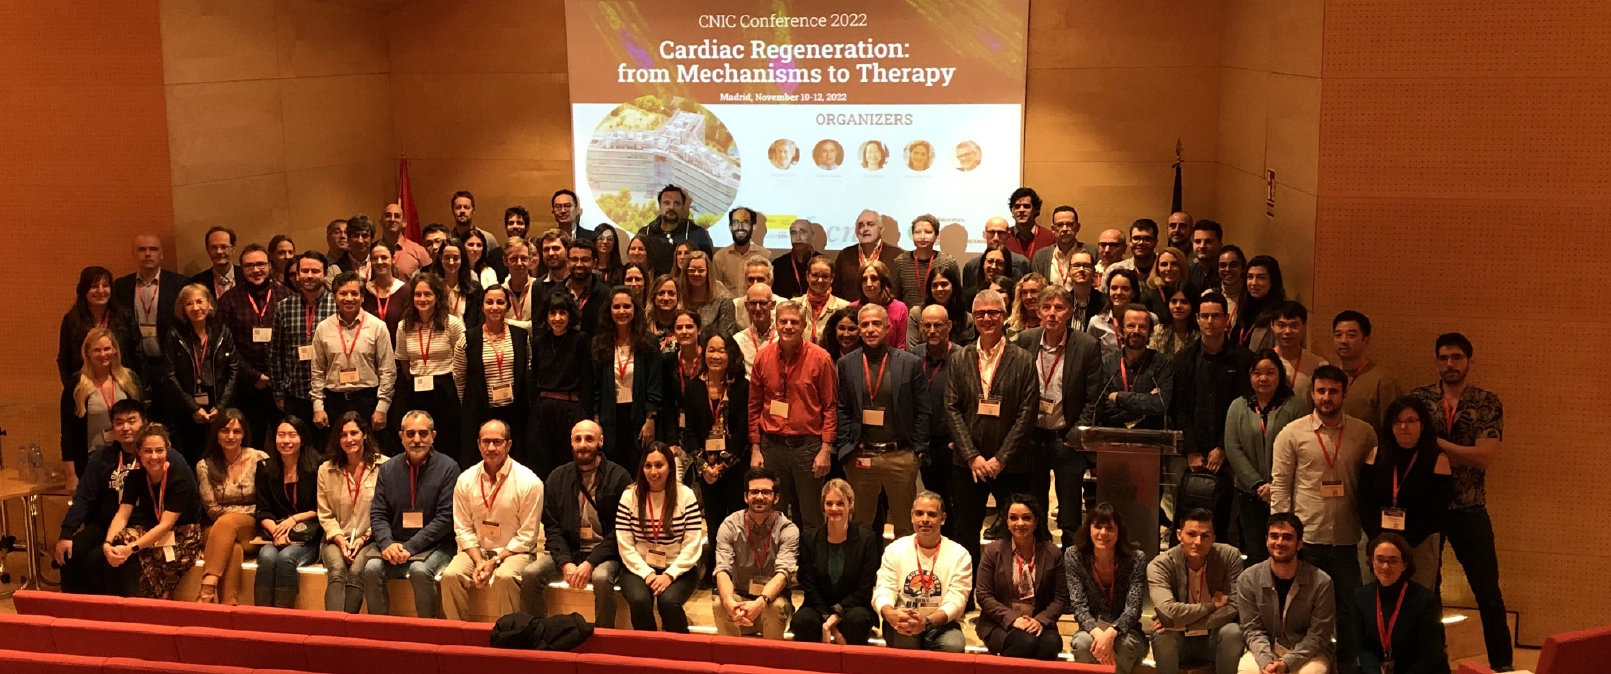 CNIC Conference on Cardiac Regeneration: from Mechanisms to Therapy